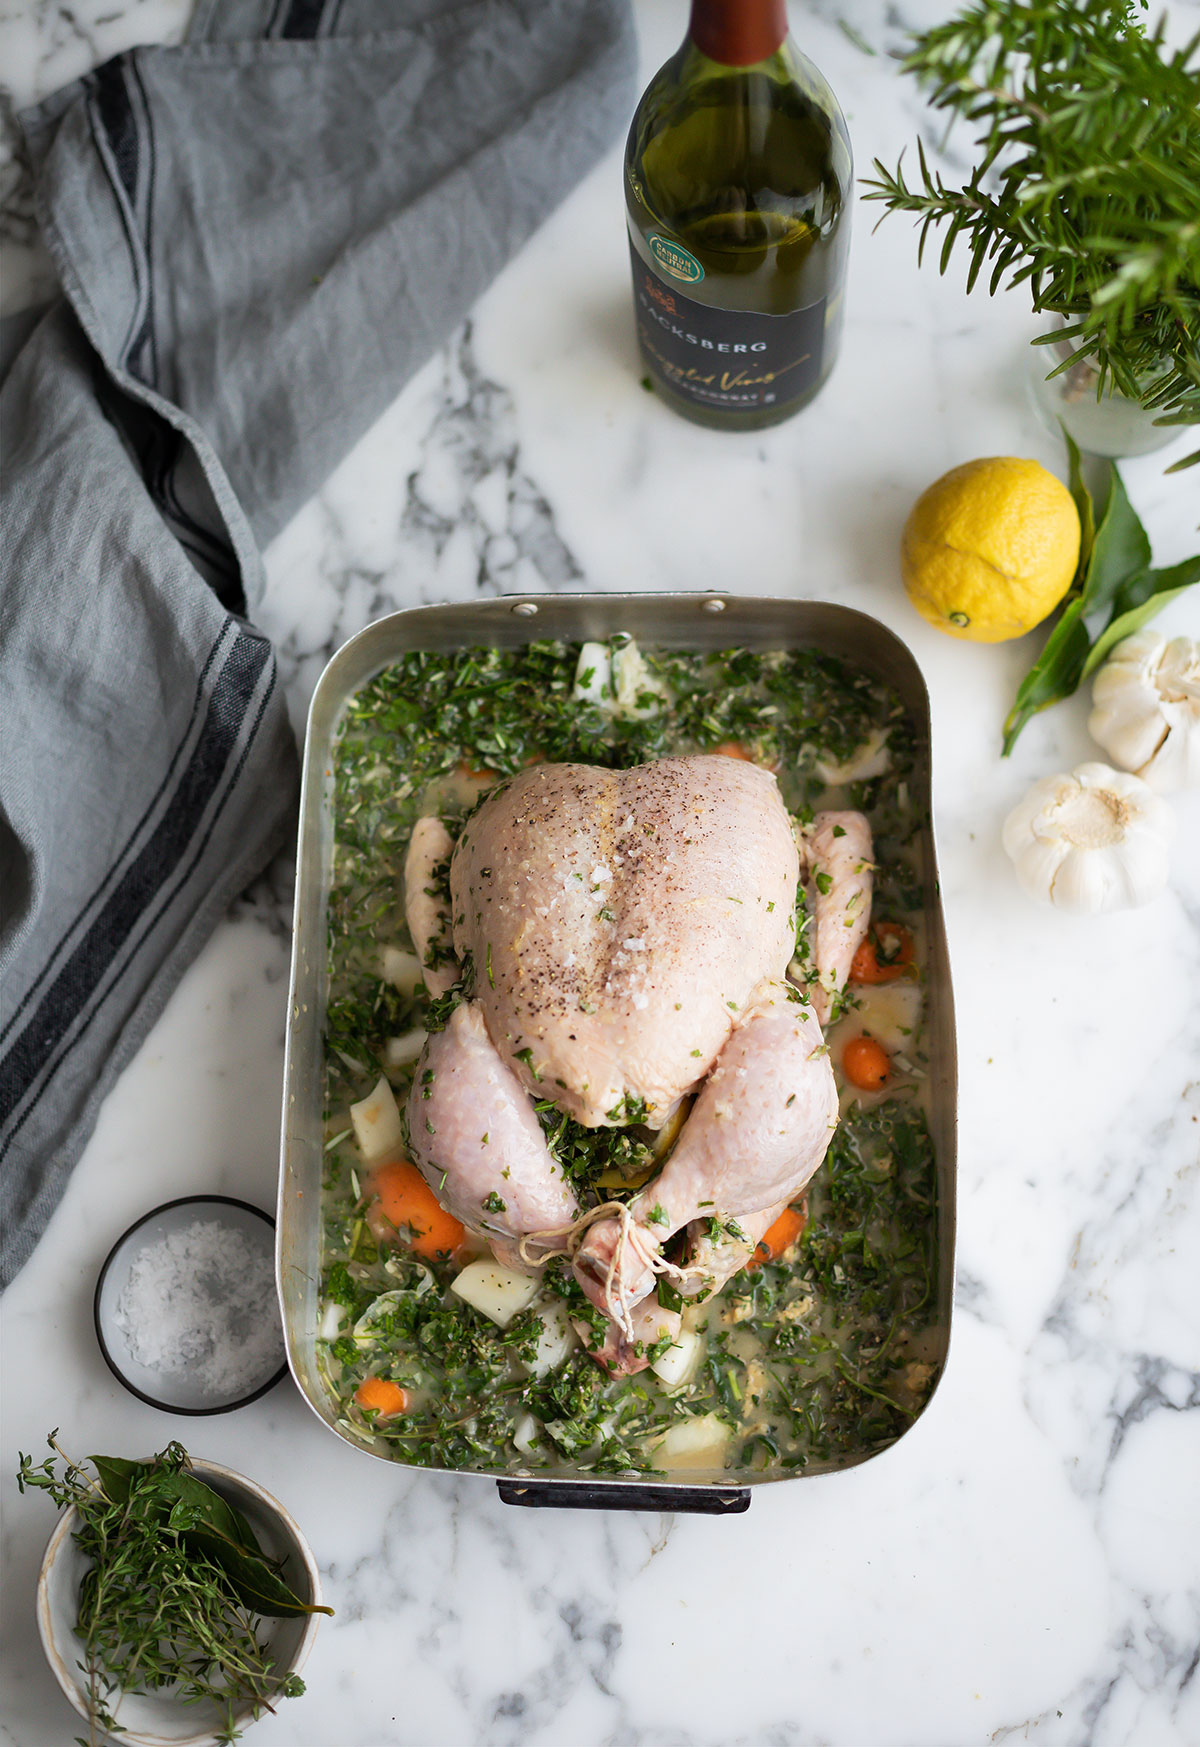 A raw chicken about to be turned into the best roast chicken with wine, herbs and garlic recipe